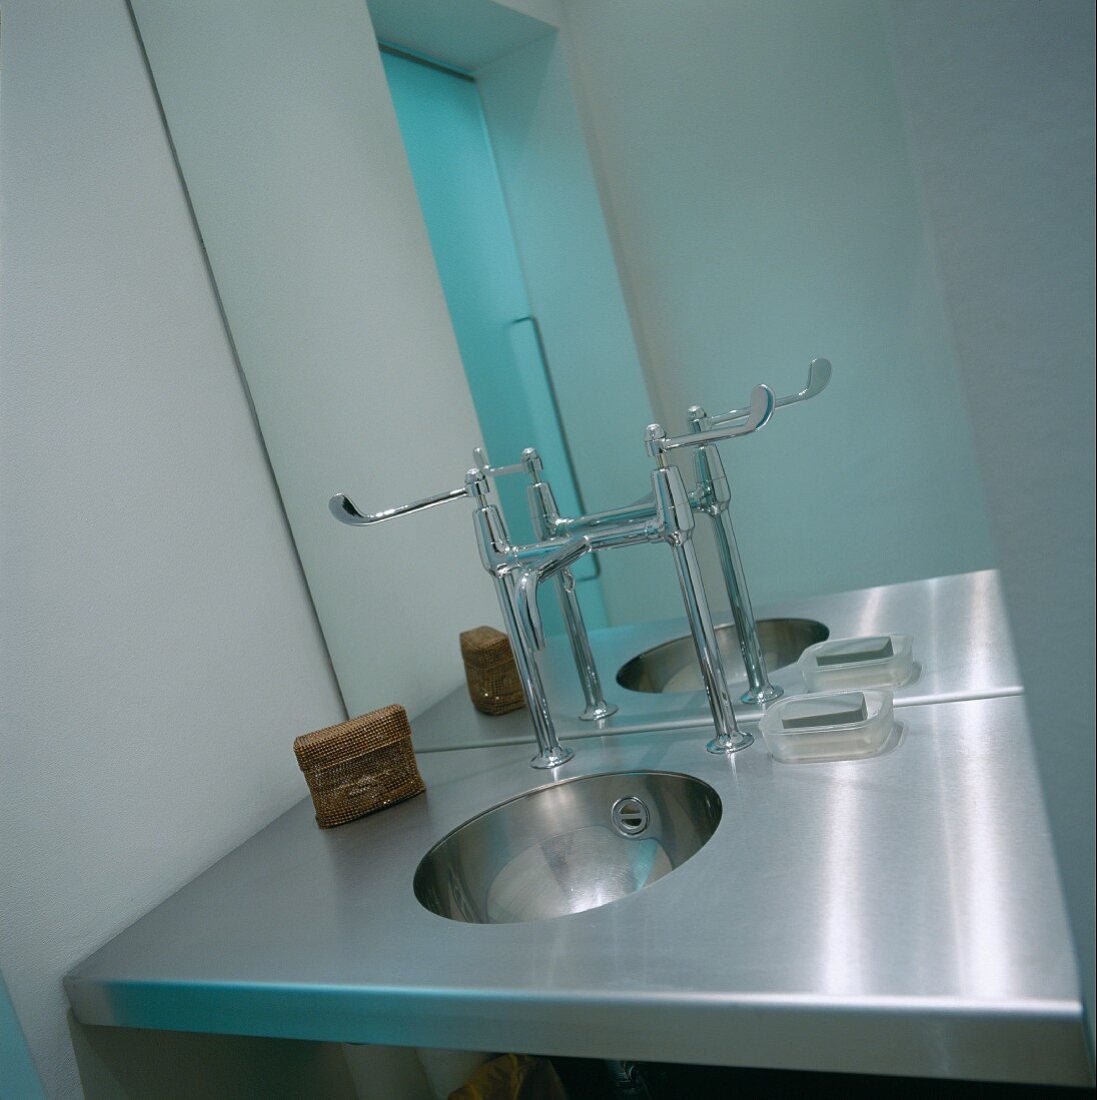 Stainless steel designer washstand with taps in front of mirror